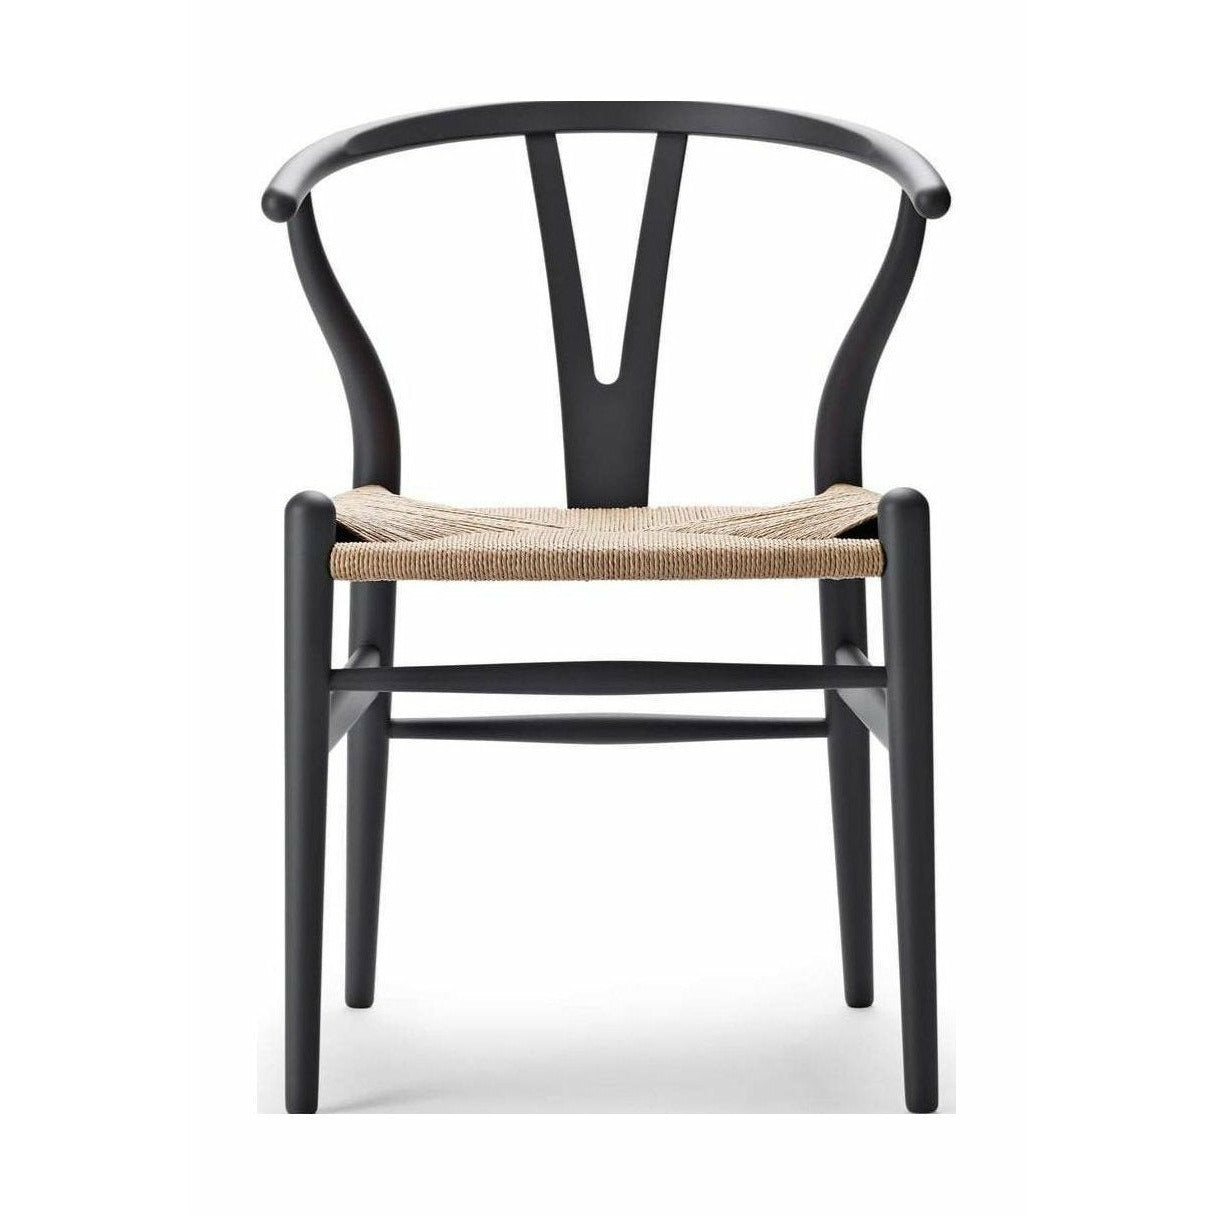 Carl Hansen Ch24 Wishbone Chair Special Edition, Beech Special Edition, Soft Gray